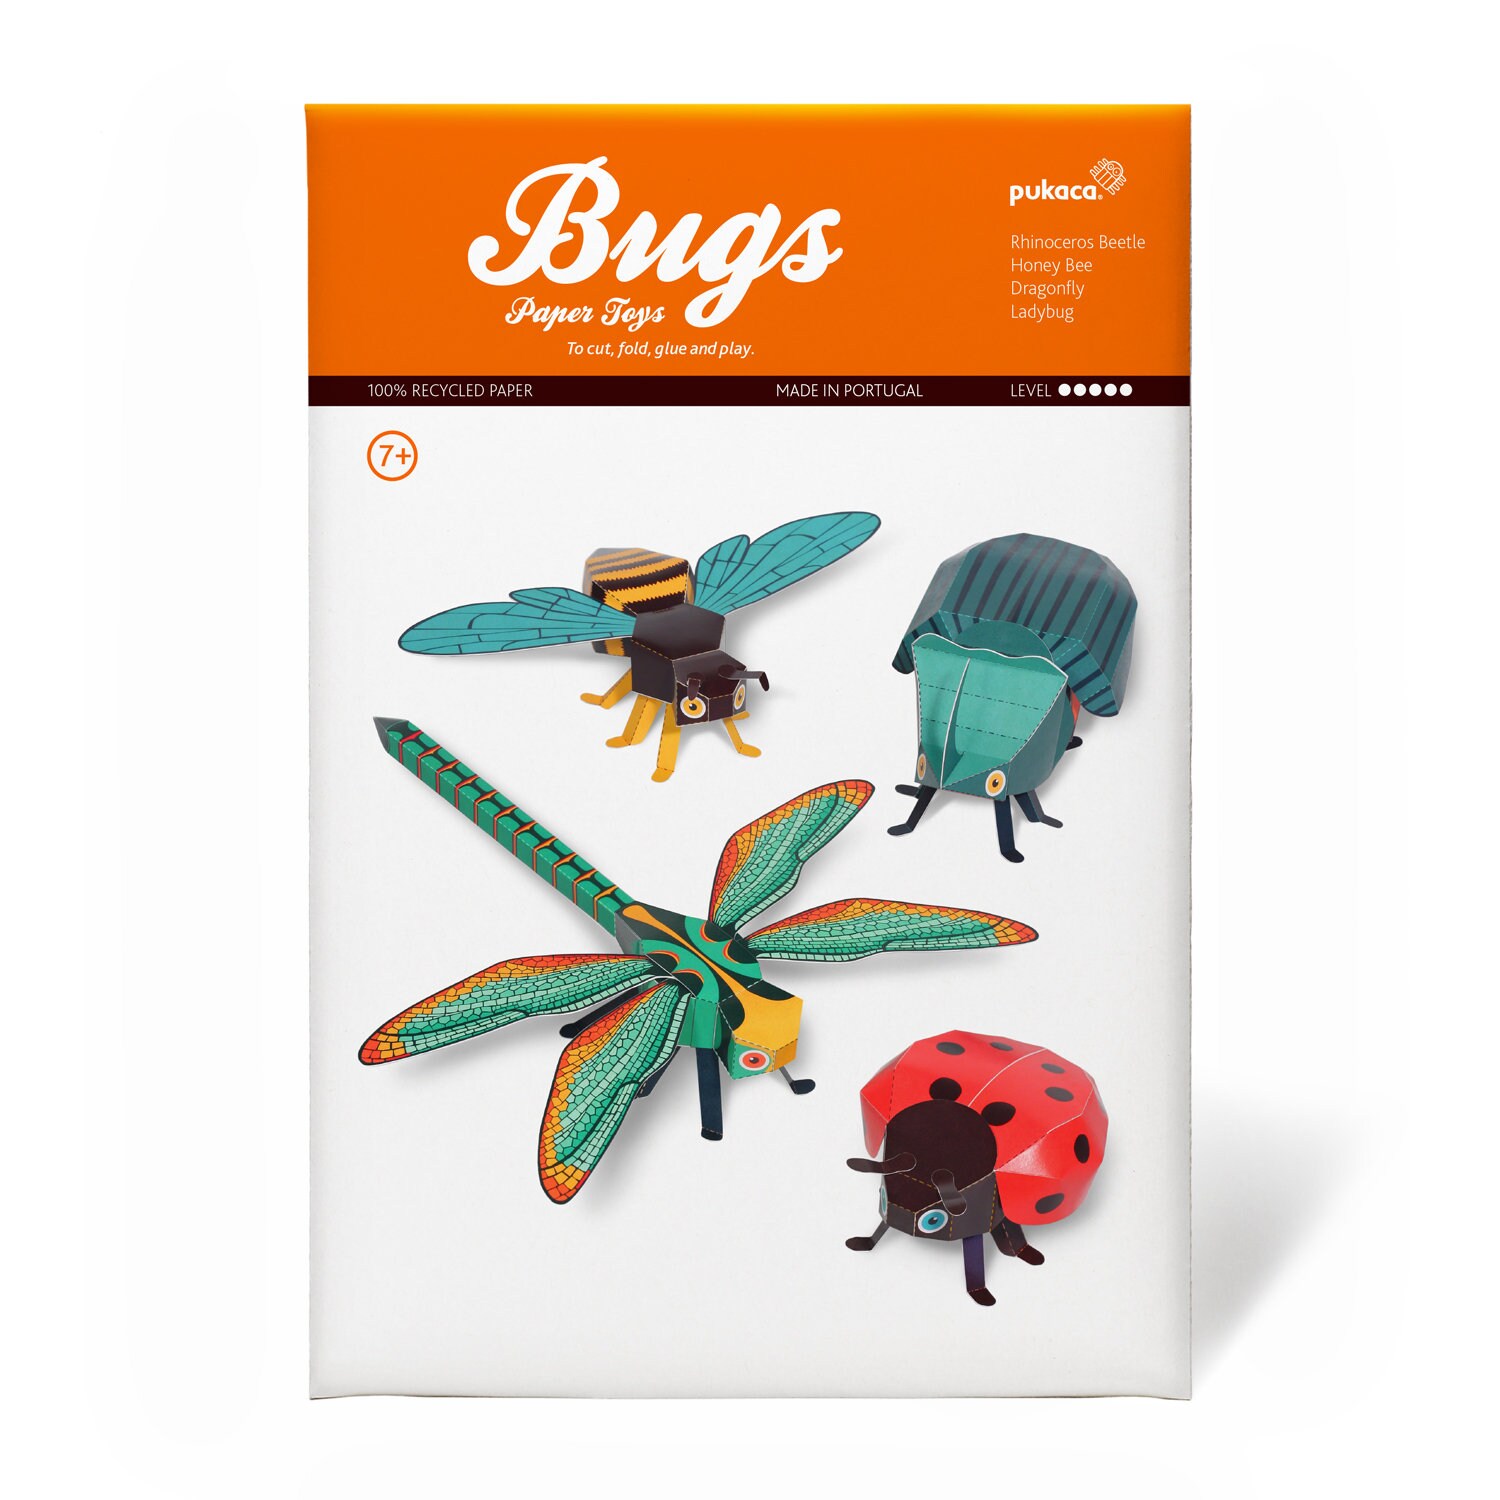 Paper Creation Paper Bugs - Mudpuddles Toys and Books